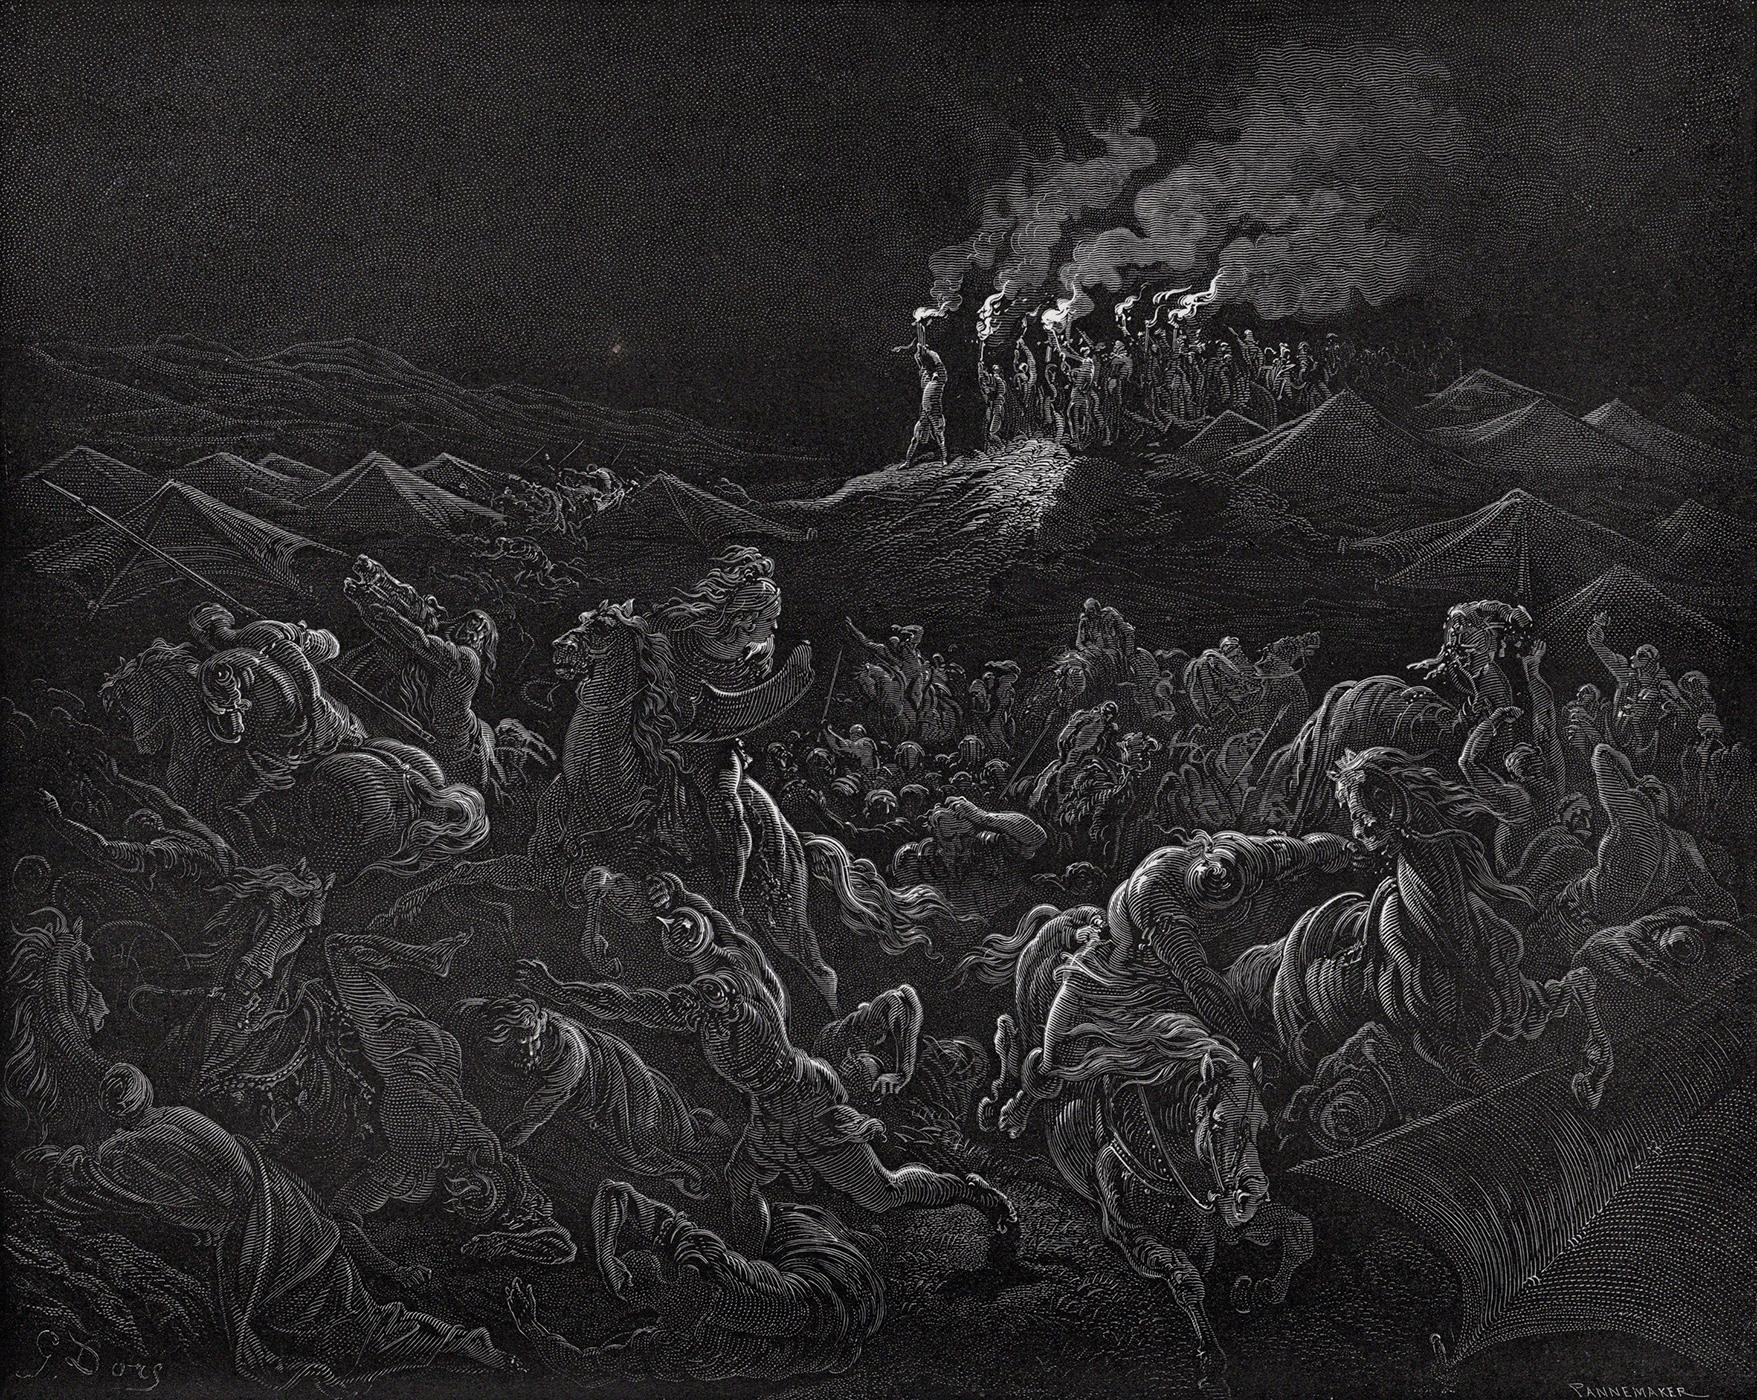 The Midianites put to Flight (From Dore's Bible) by Gustave Doré, Adolphe Francois Pannemaker, c. 1880